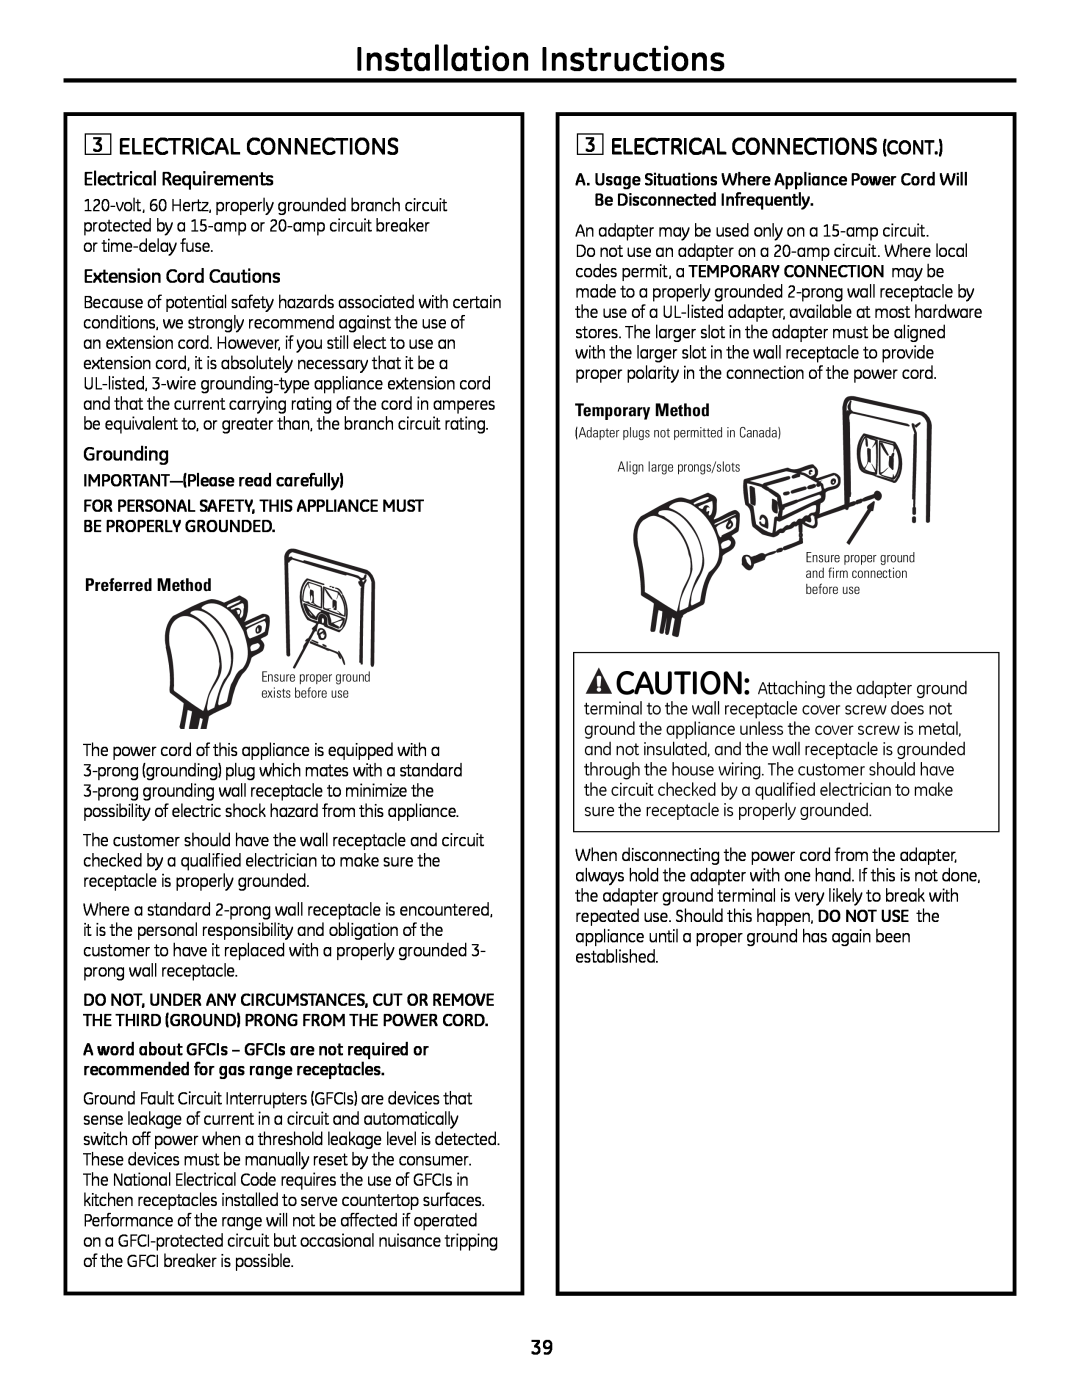 GE 49-85179 Installation Instructions, 3ElECTRICAl ConnECTIonS ConT, Electrical Requirements, Extension Cord Cautions 